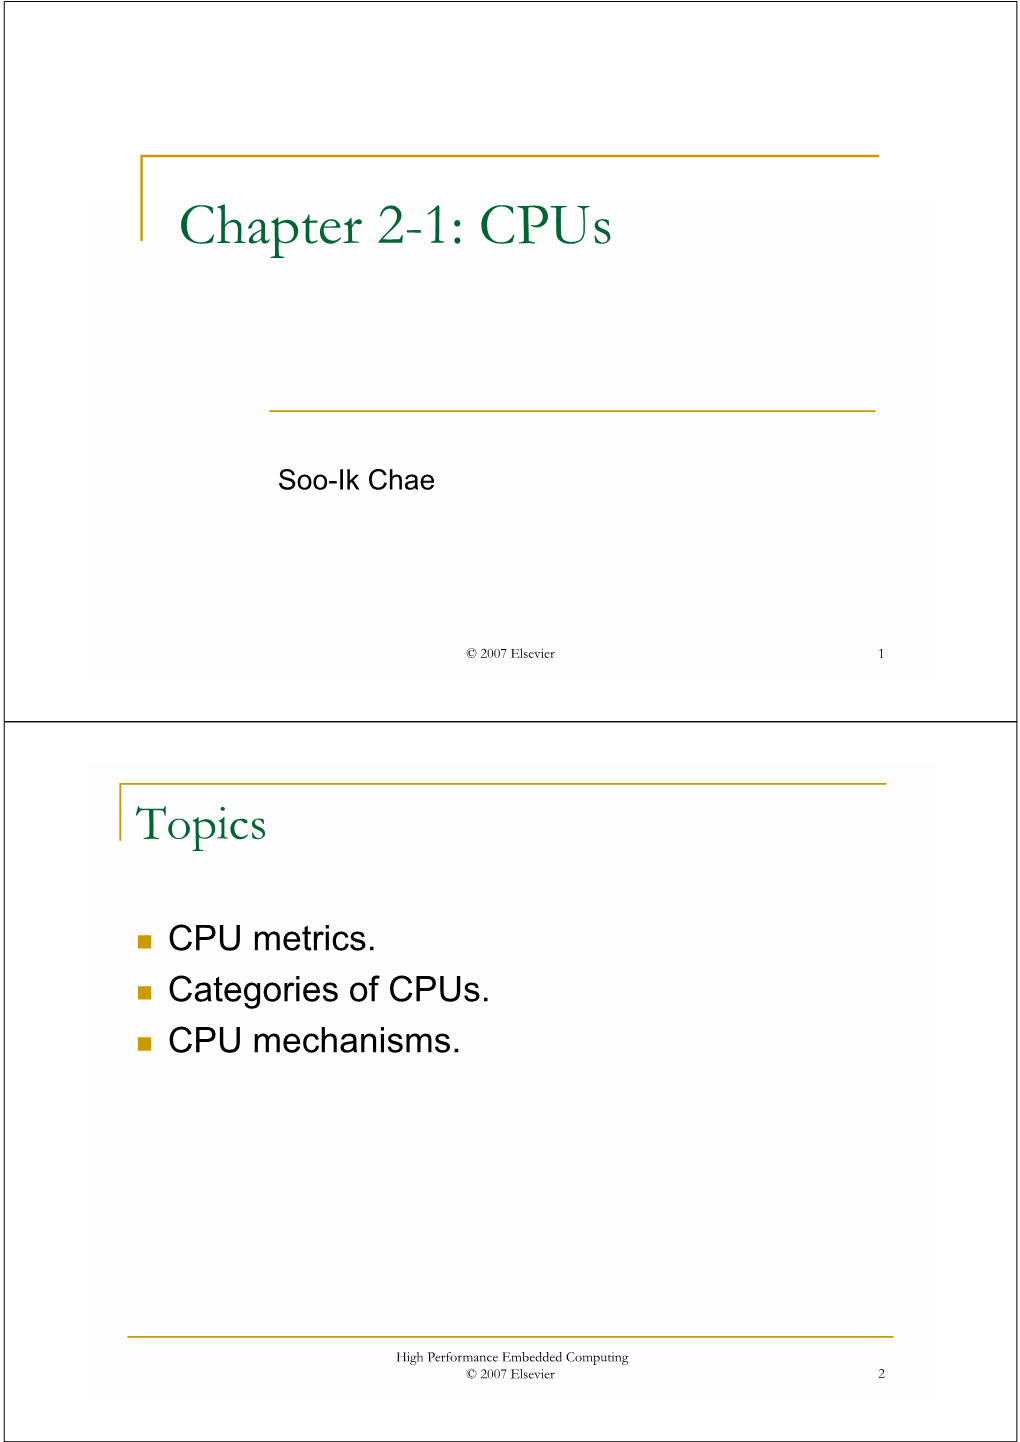 Chapter 2-1: Cpus